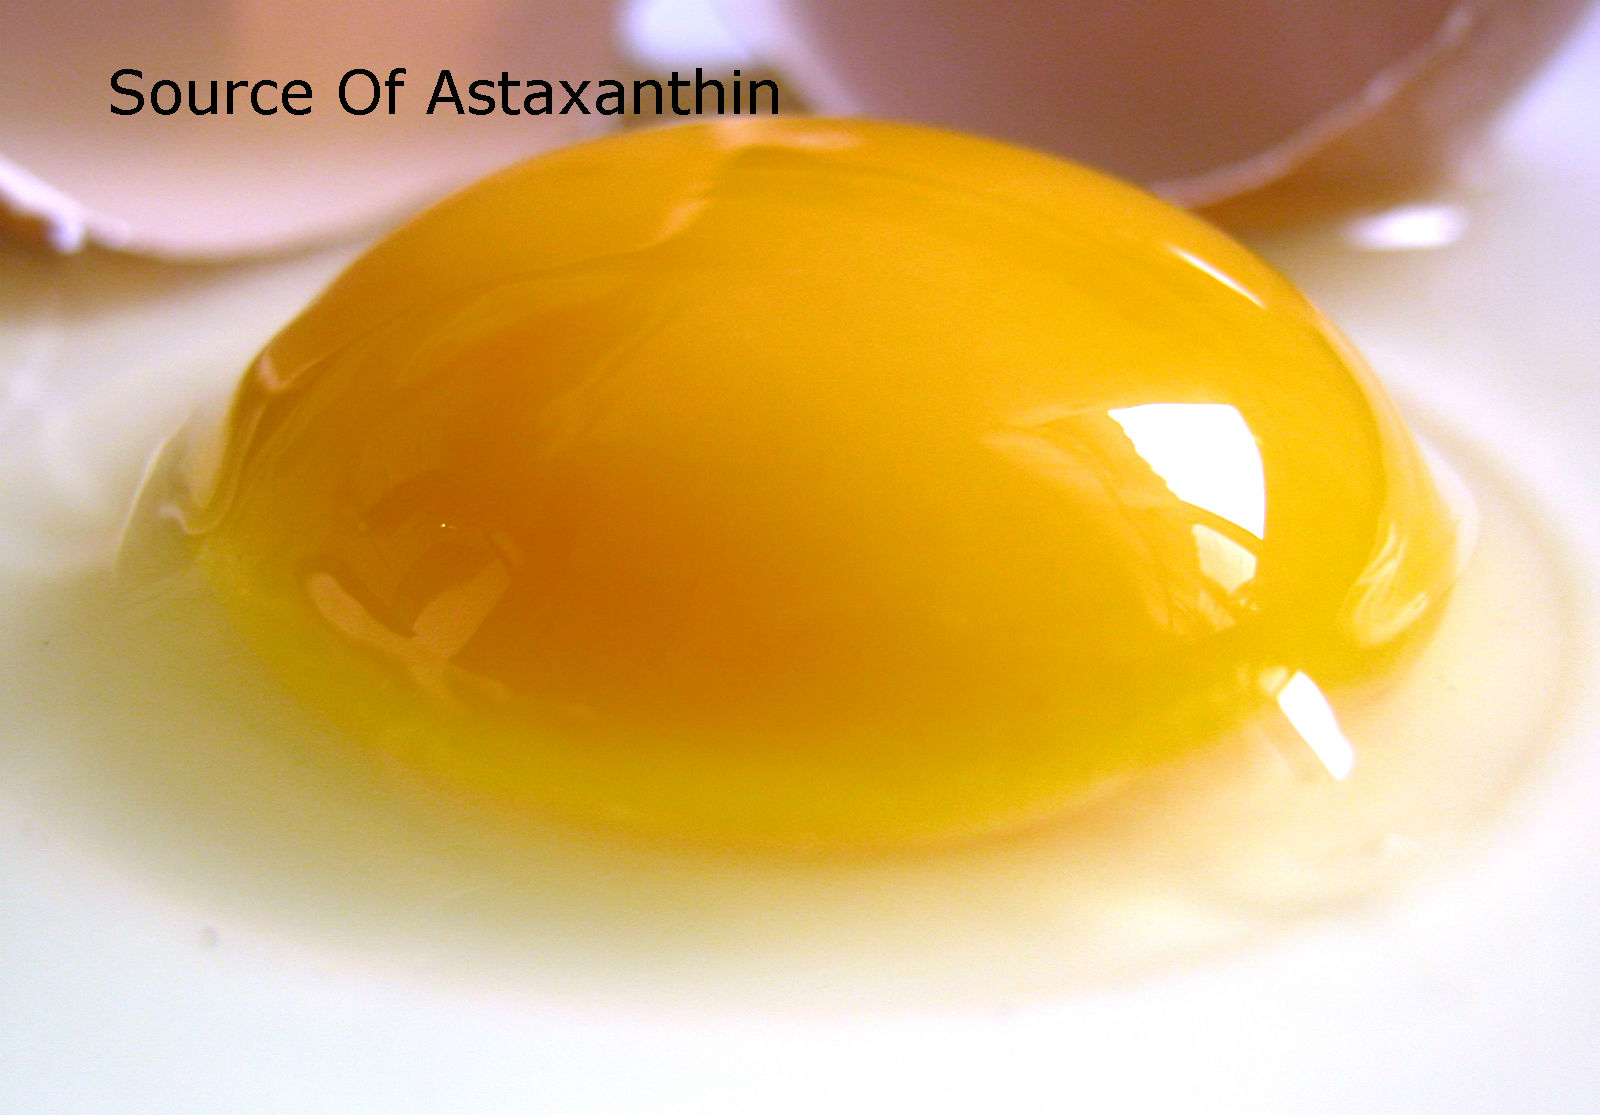 What are the health benefits of Astaxanthin?